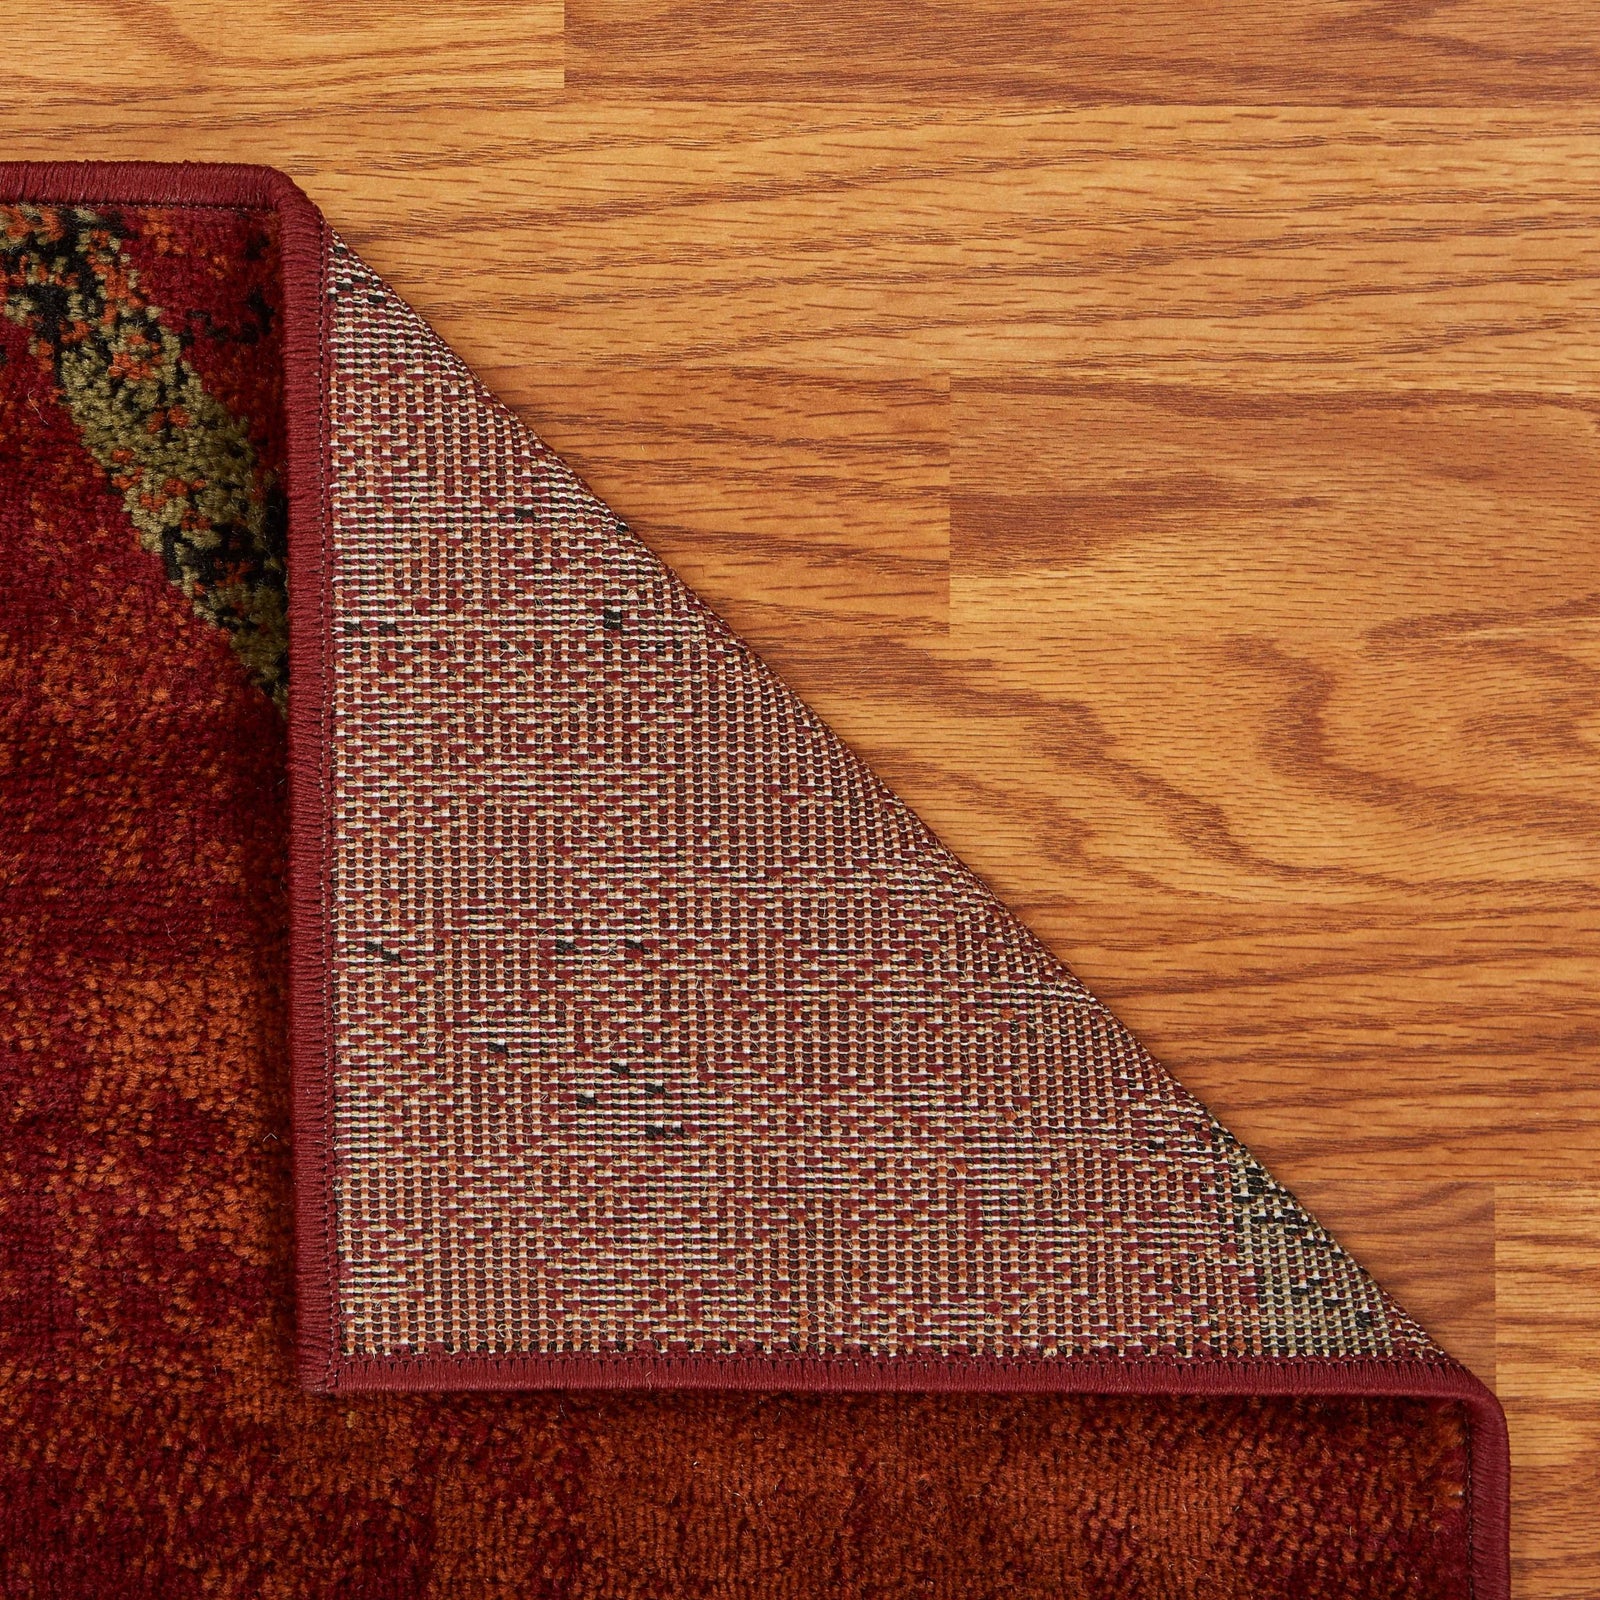 5’ x 7’ Red and Brown Geometric Area Rug